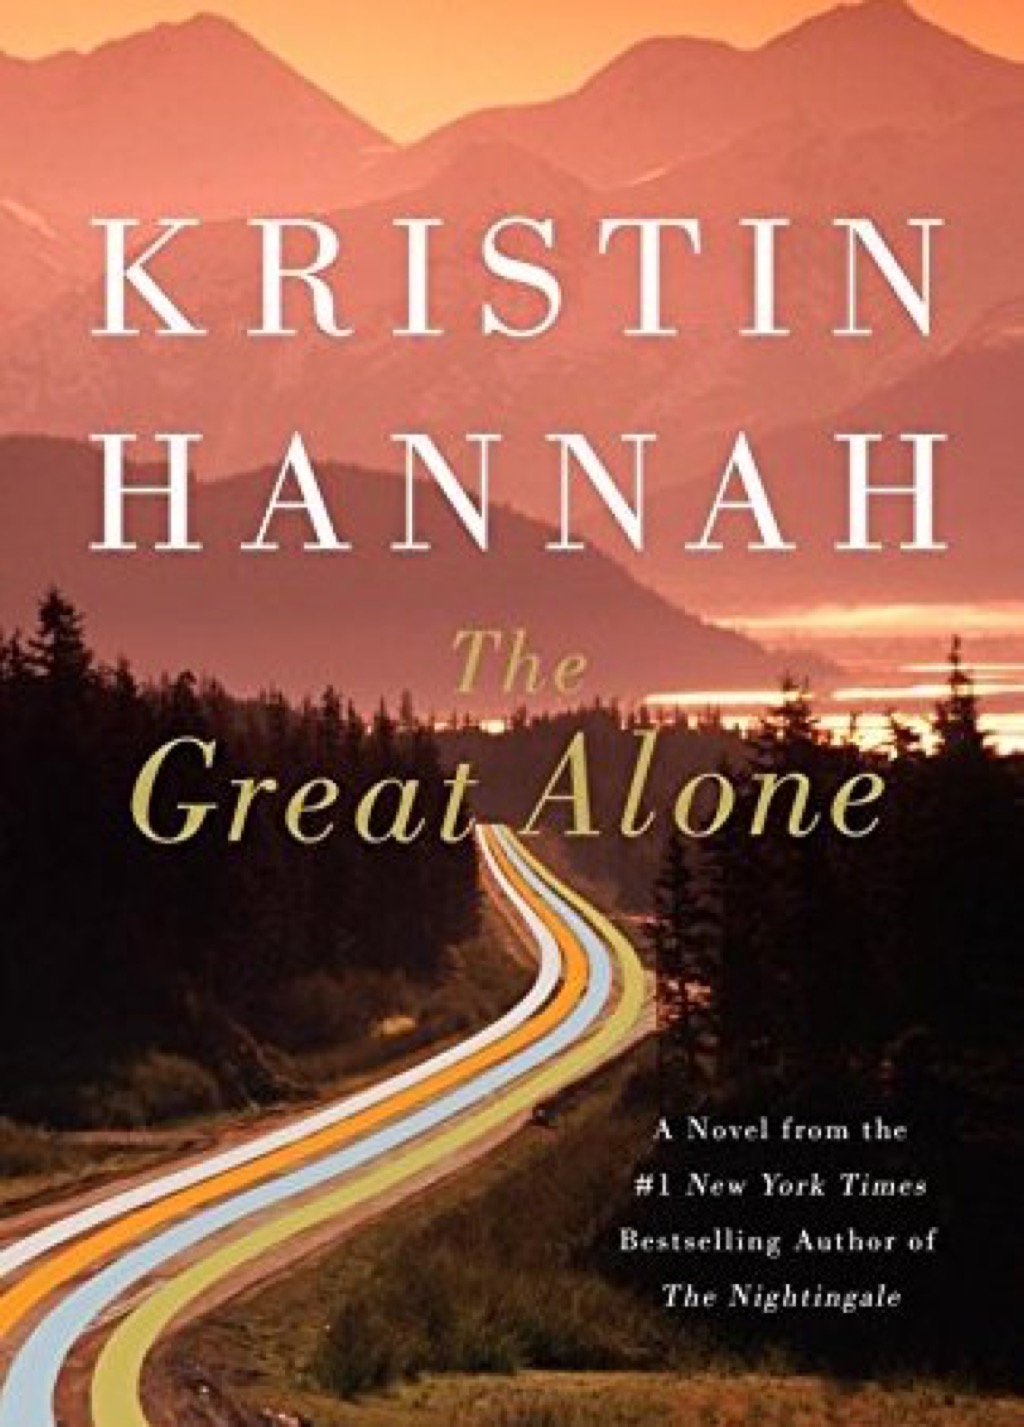 The Great Alone books every woman should read in her 40s